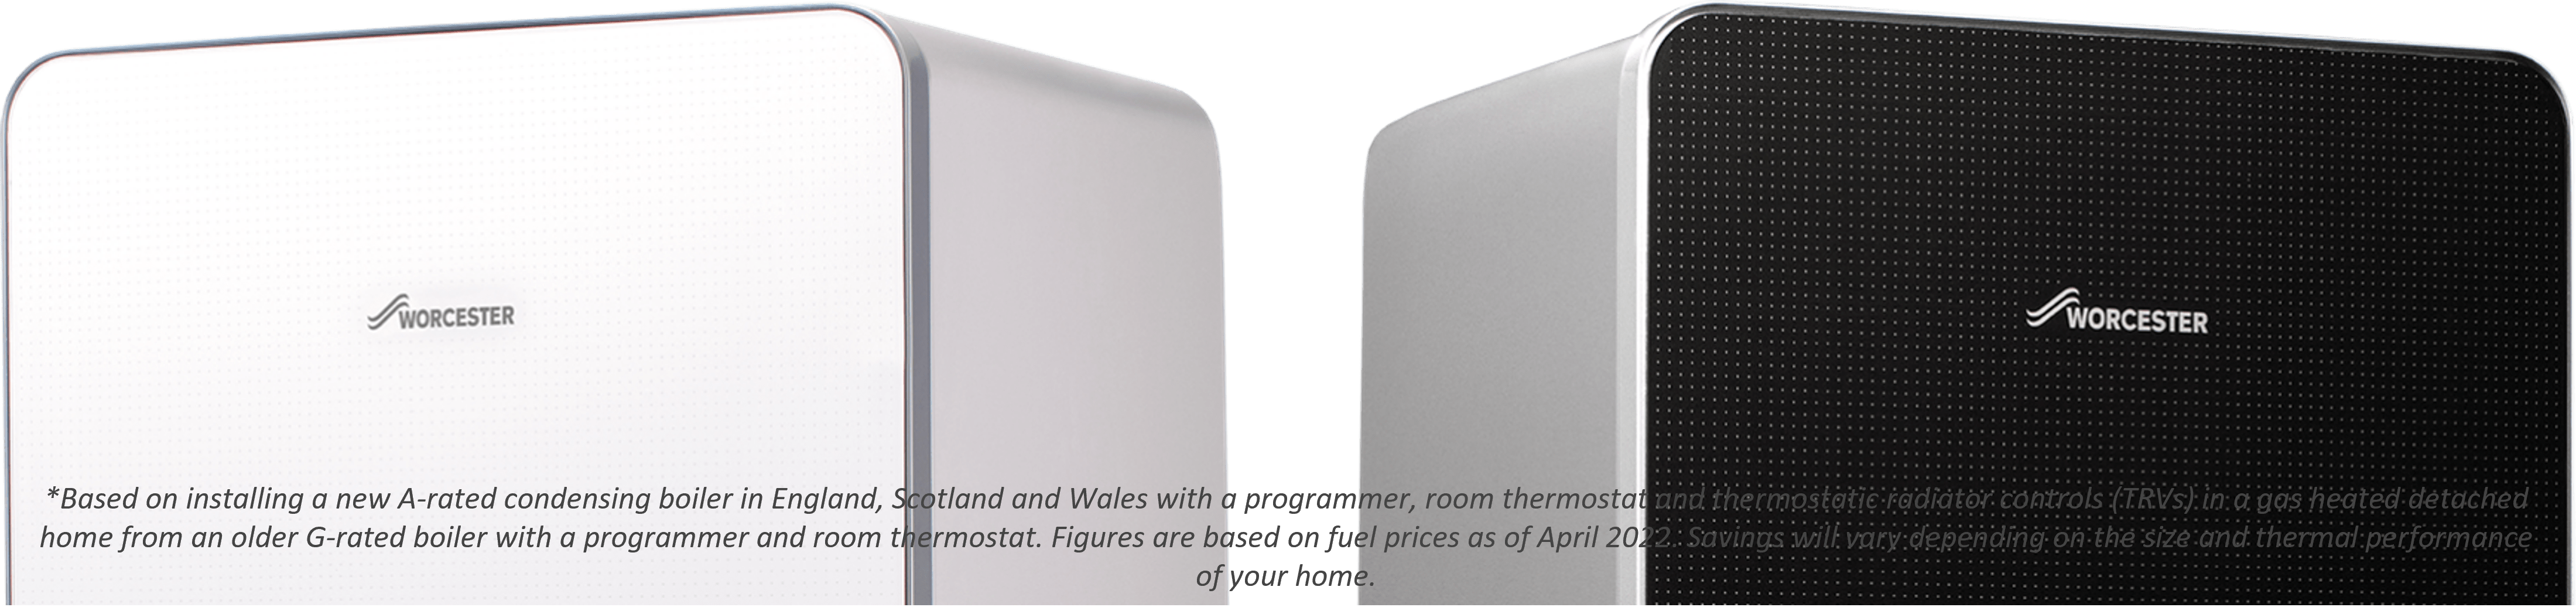 Save money on your energy bills with a new boiler